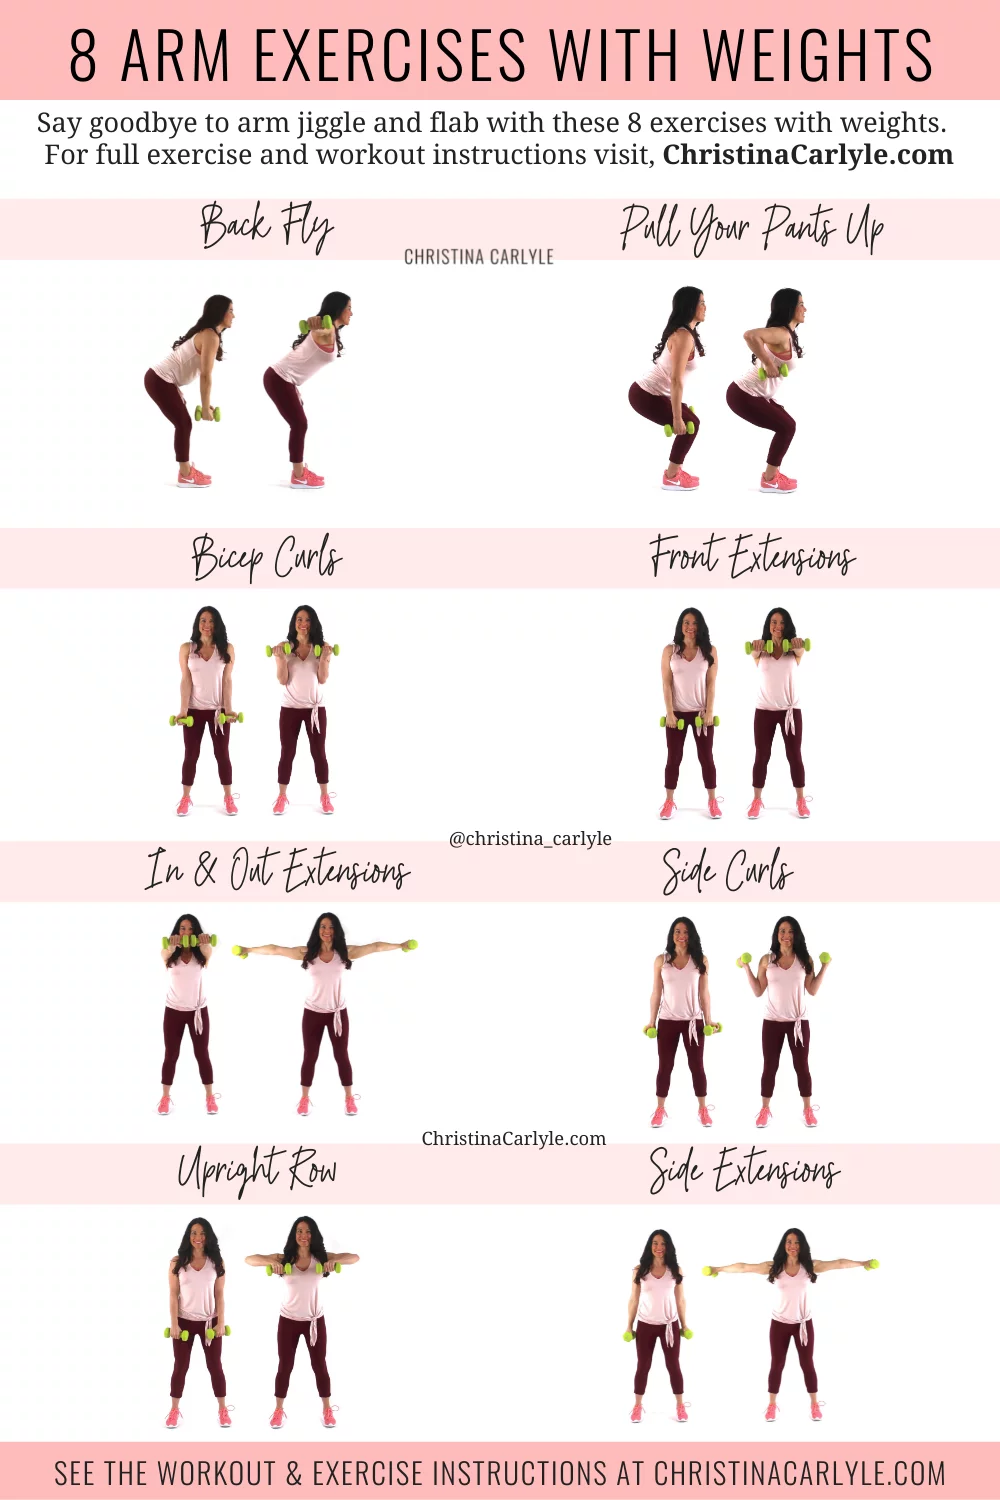 Lean Arms Workout Programs for 2 Weeks - Withsara